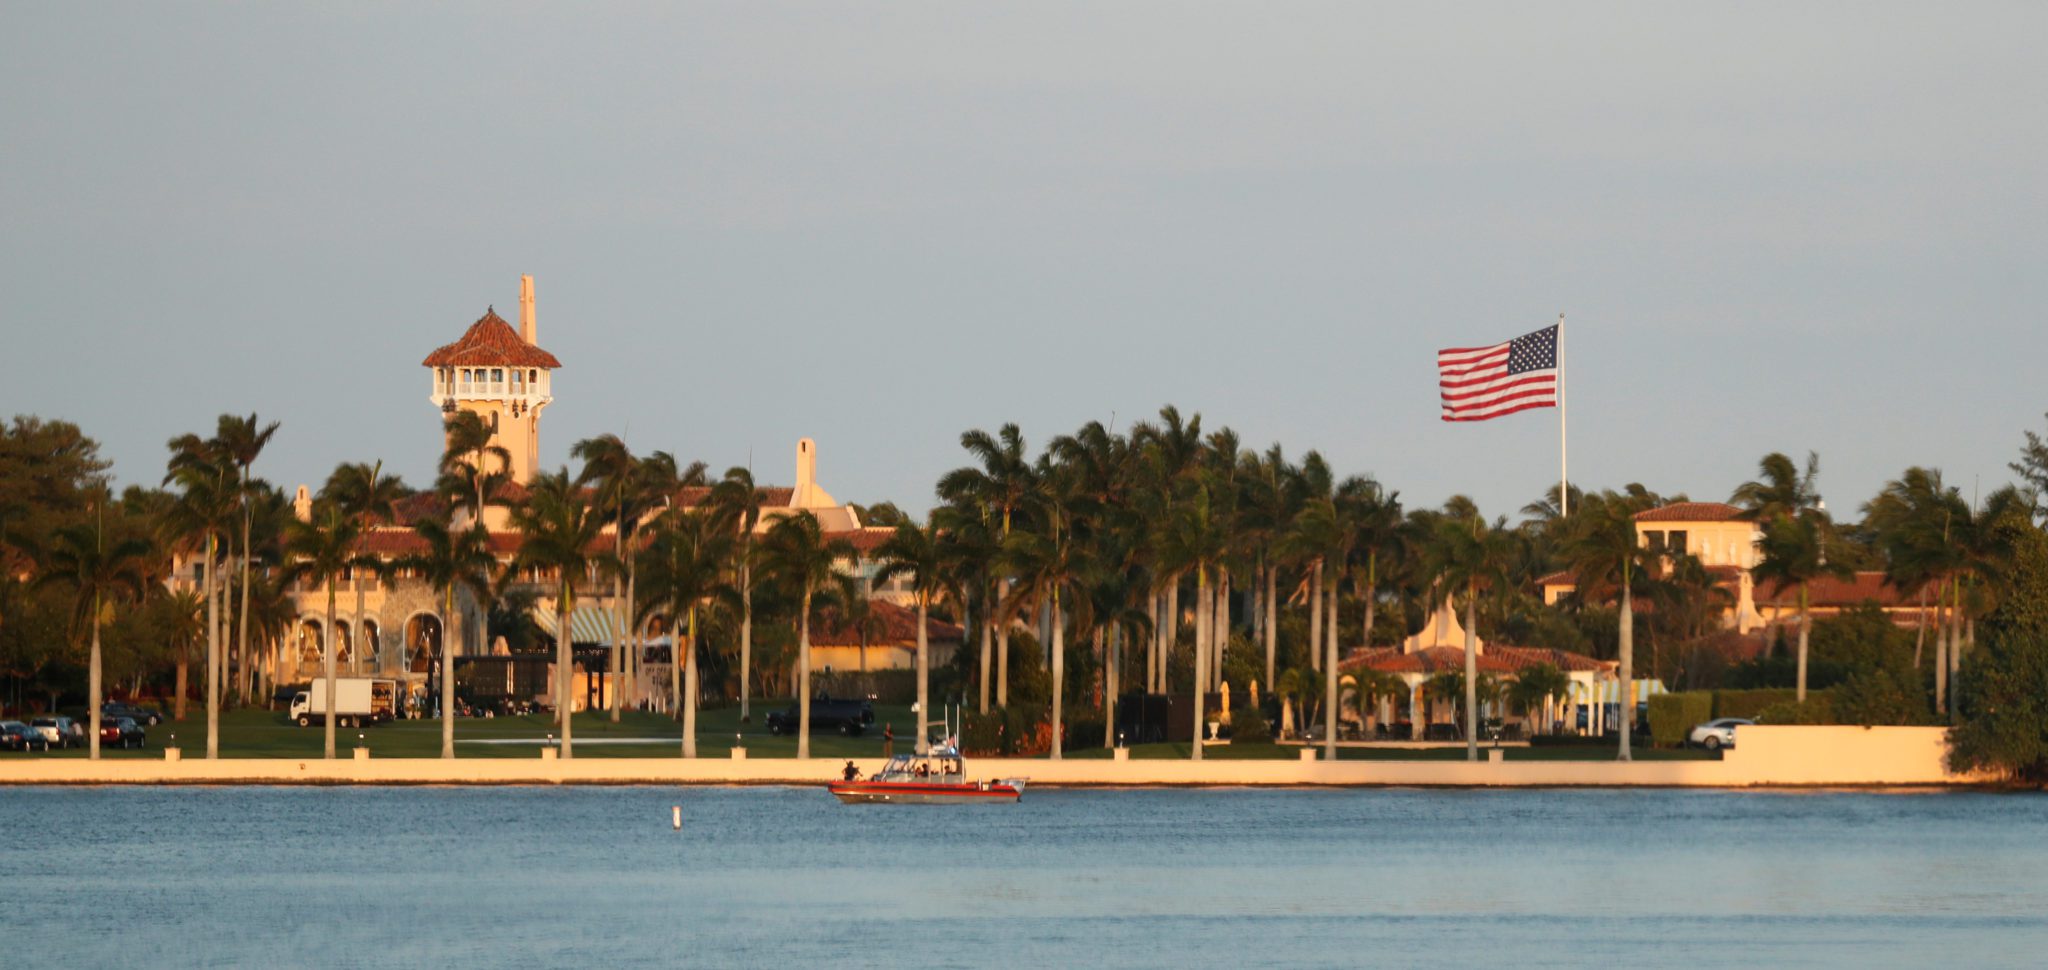 A Weird Overlooked Detail: ‘Moving Vans in Front of Mar-a-Lago’ Jan. 18th